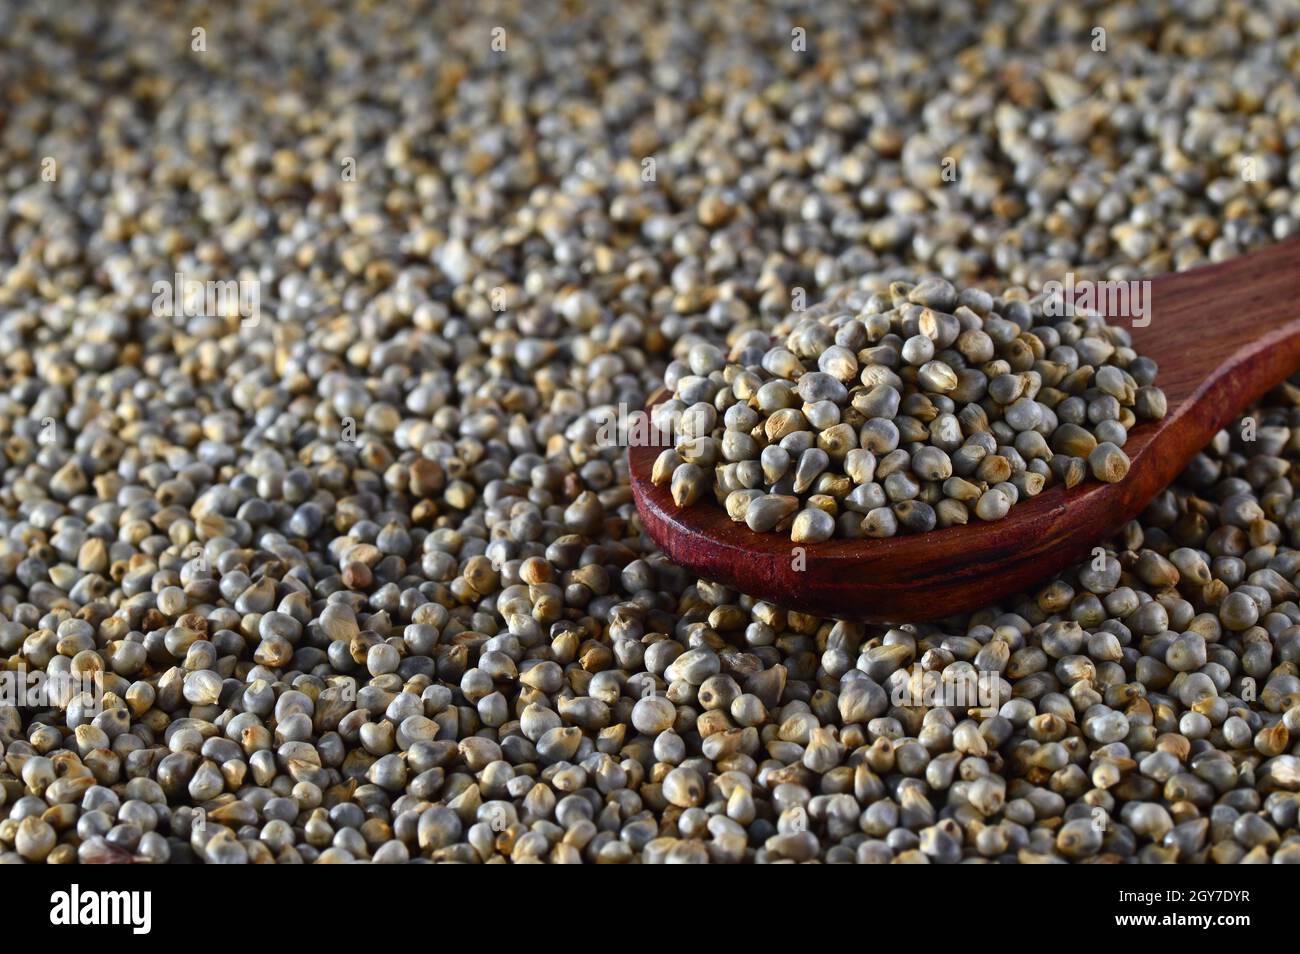 close up of Pearl Millet (Bajra) with wooden spoon. Stock Photo